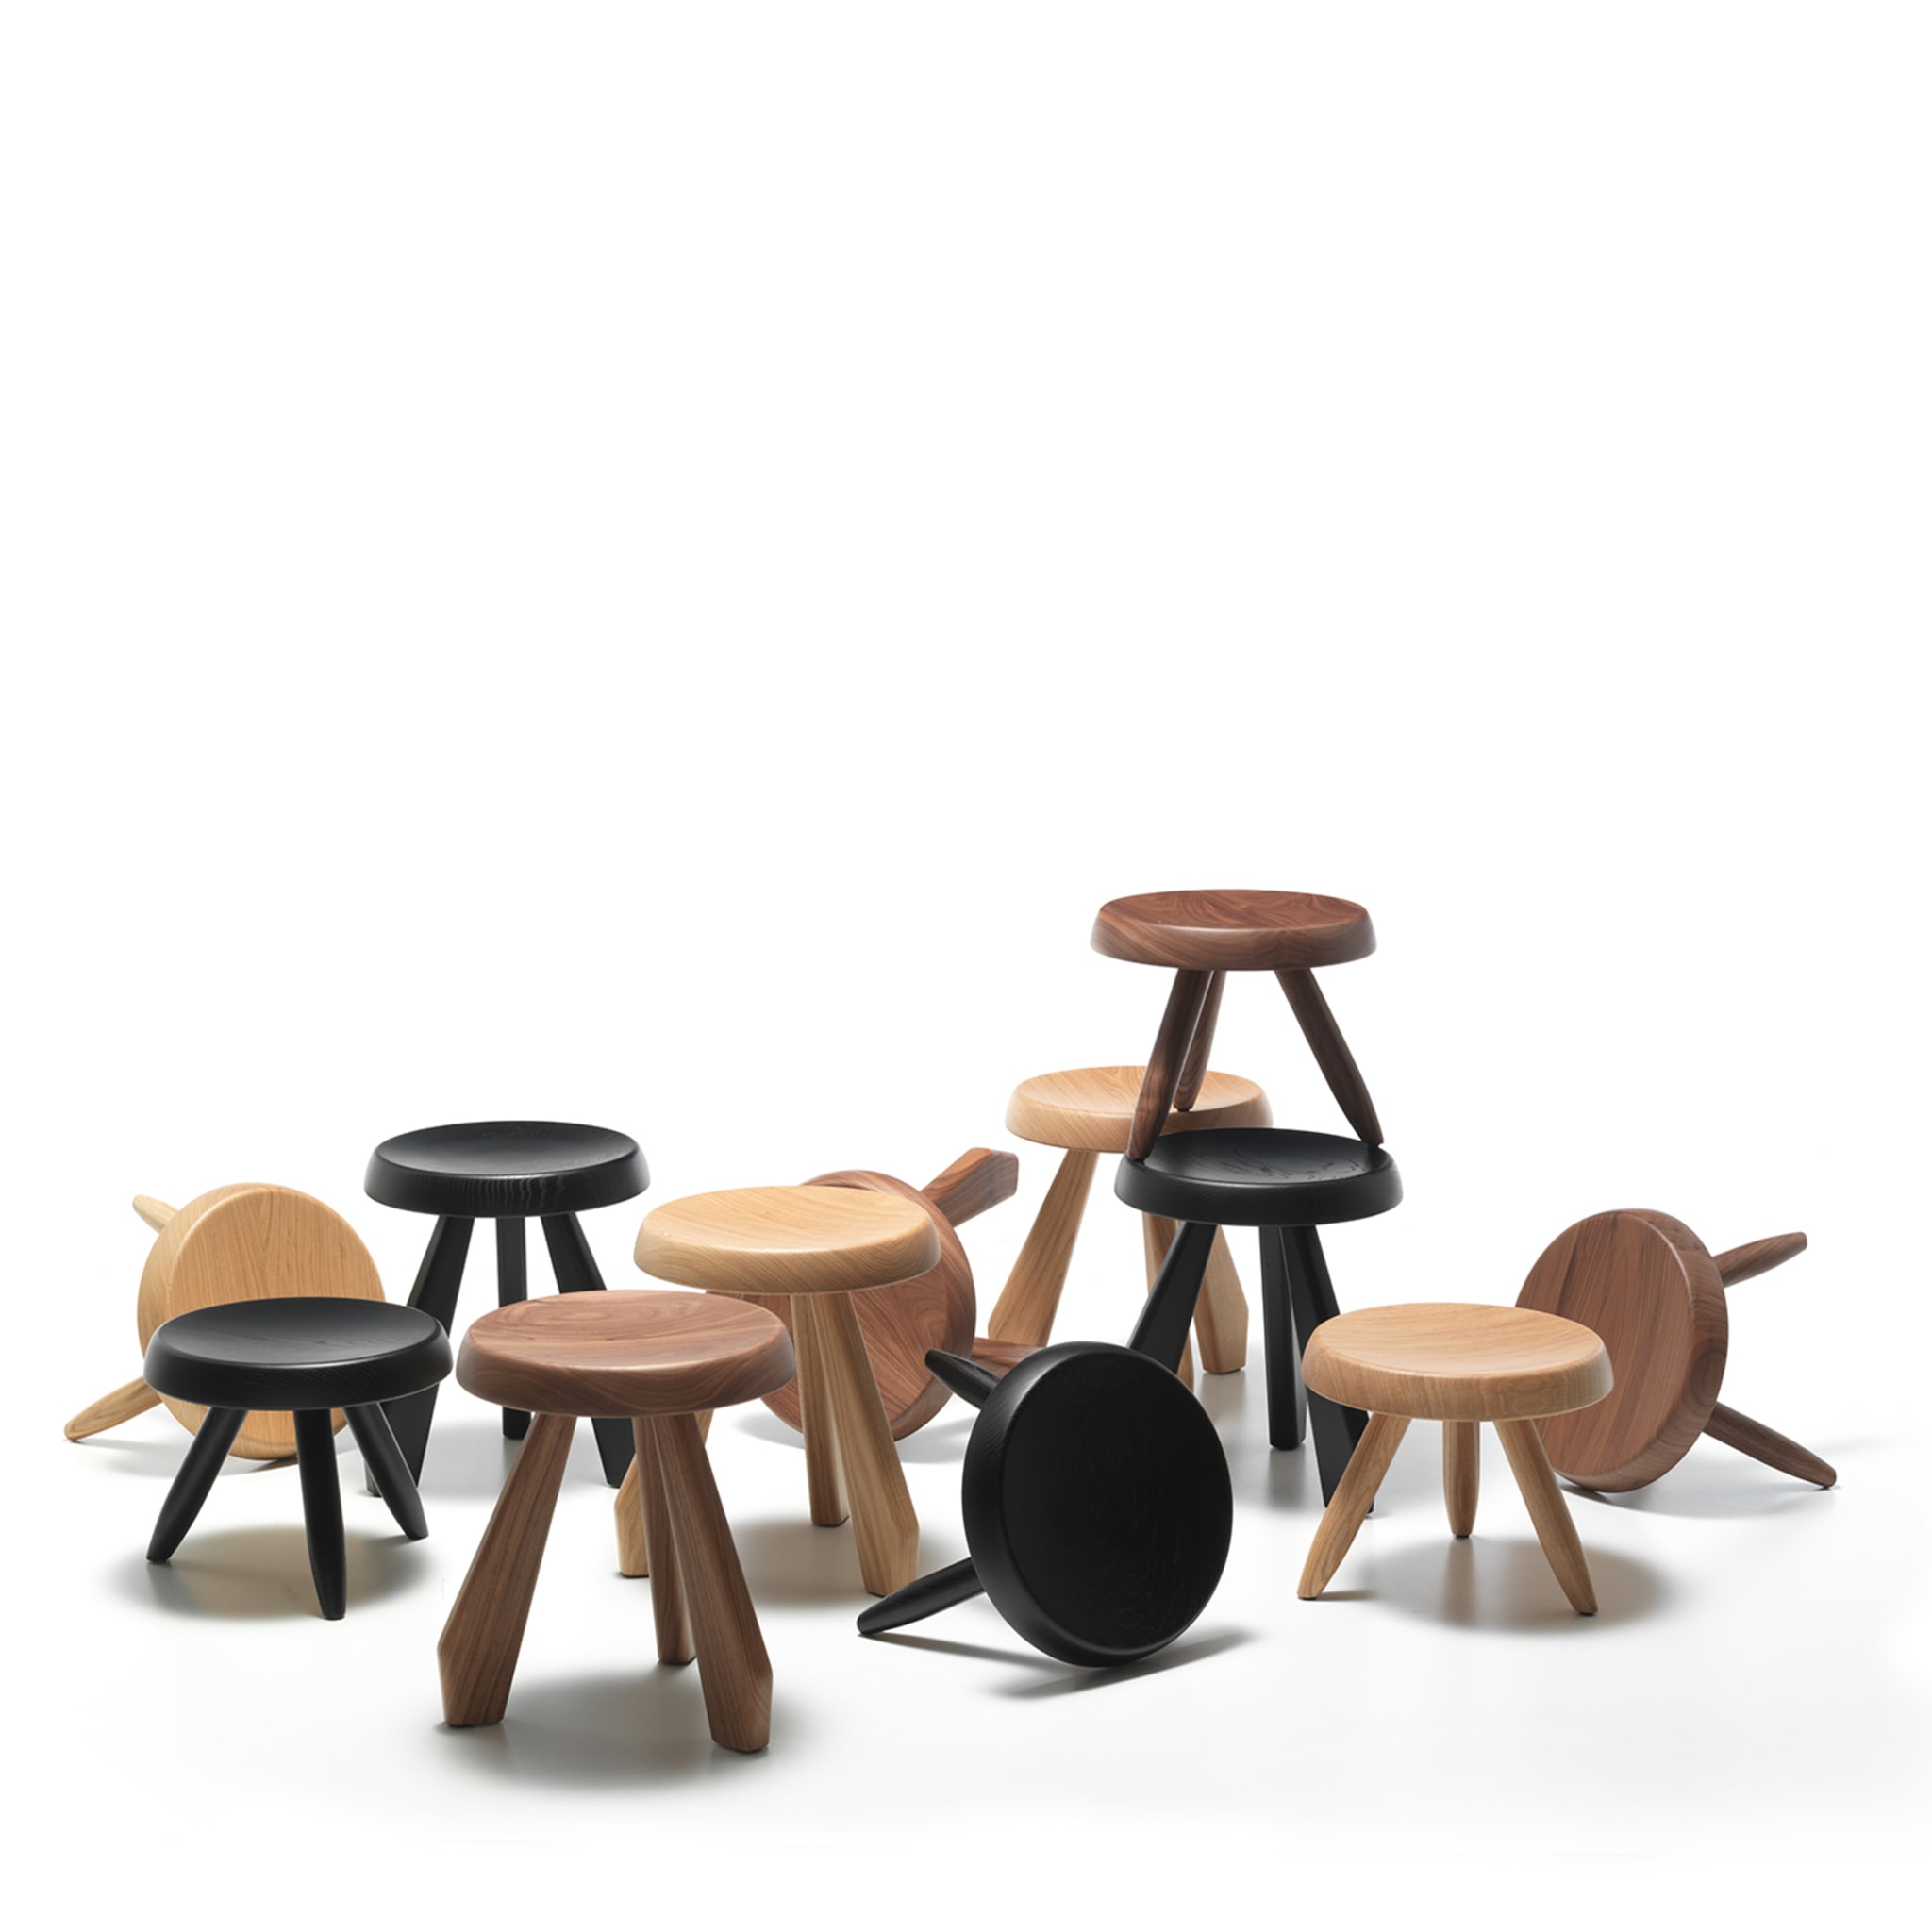 Tabouret Méribel by Charlotte Perriand - Natural Oak - Alternative view 1